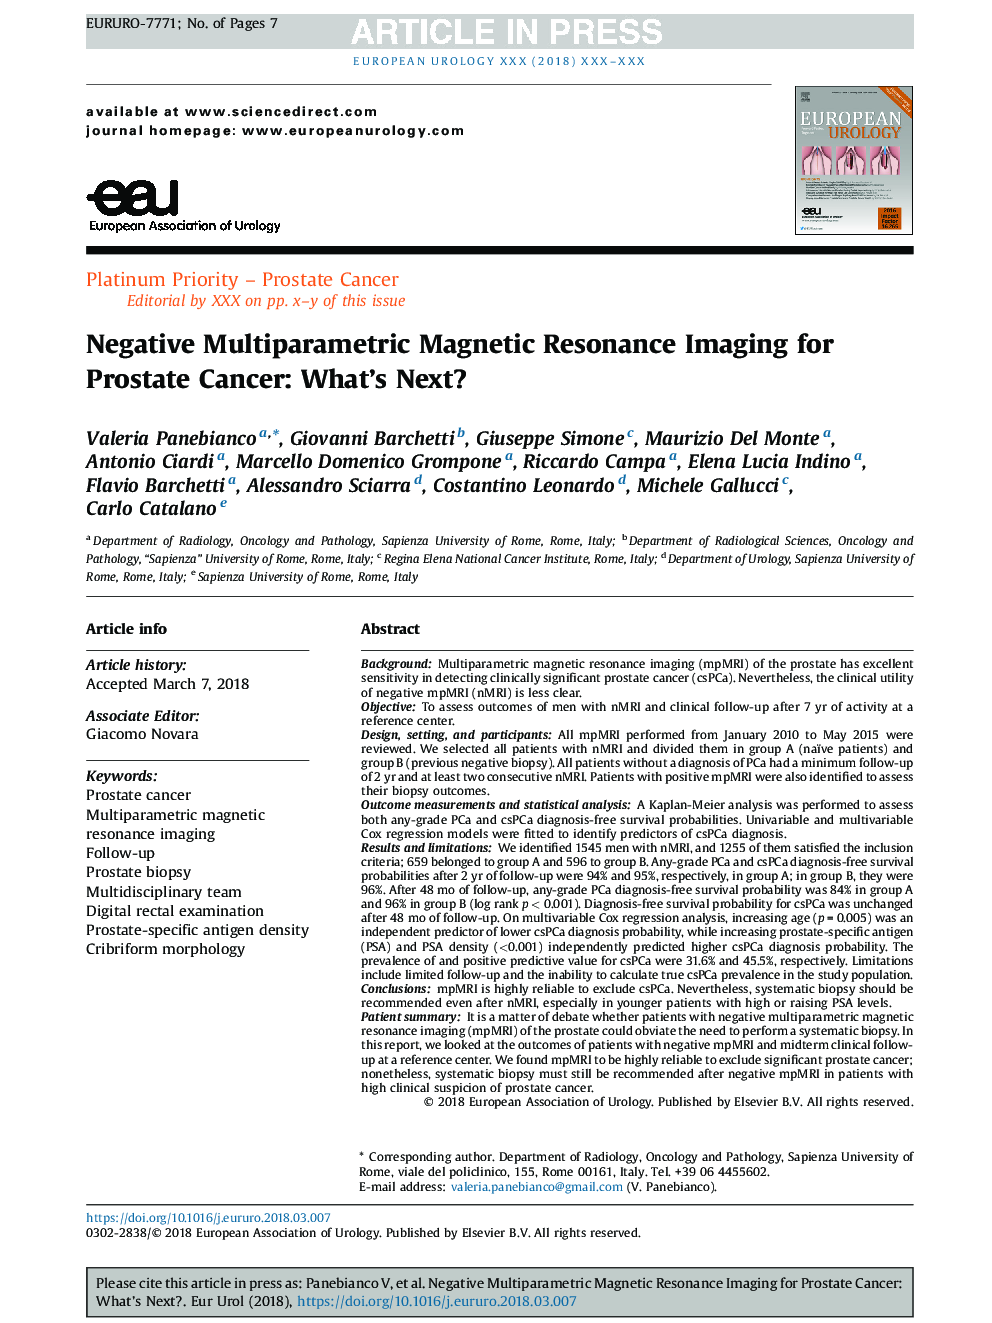 Negative Multiparametric Magnetic Resonance Imaging for Prostate Cancer: What's Next?